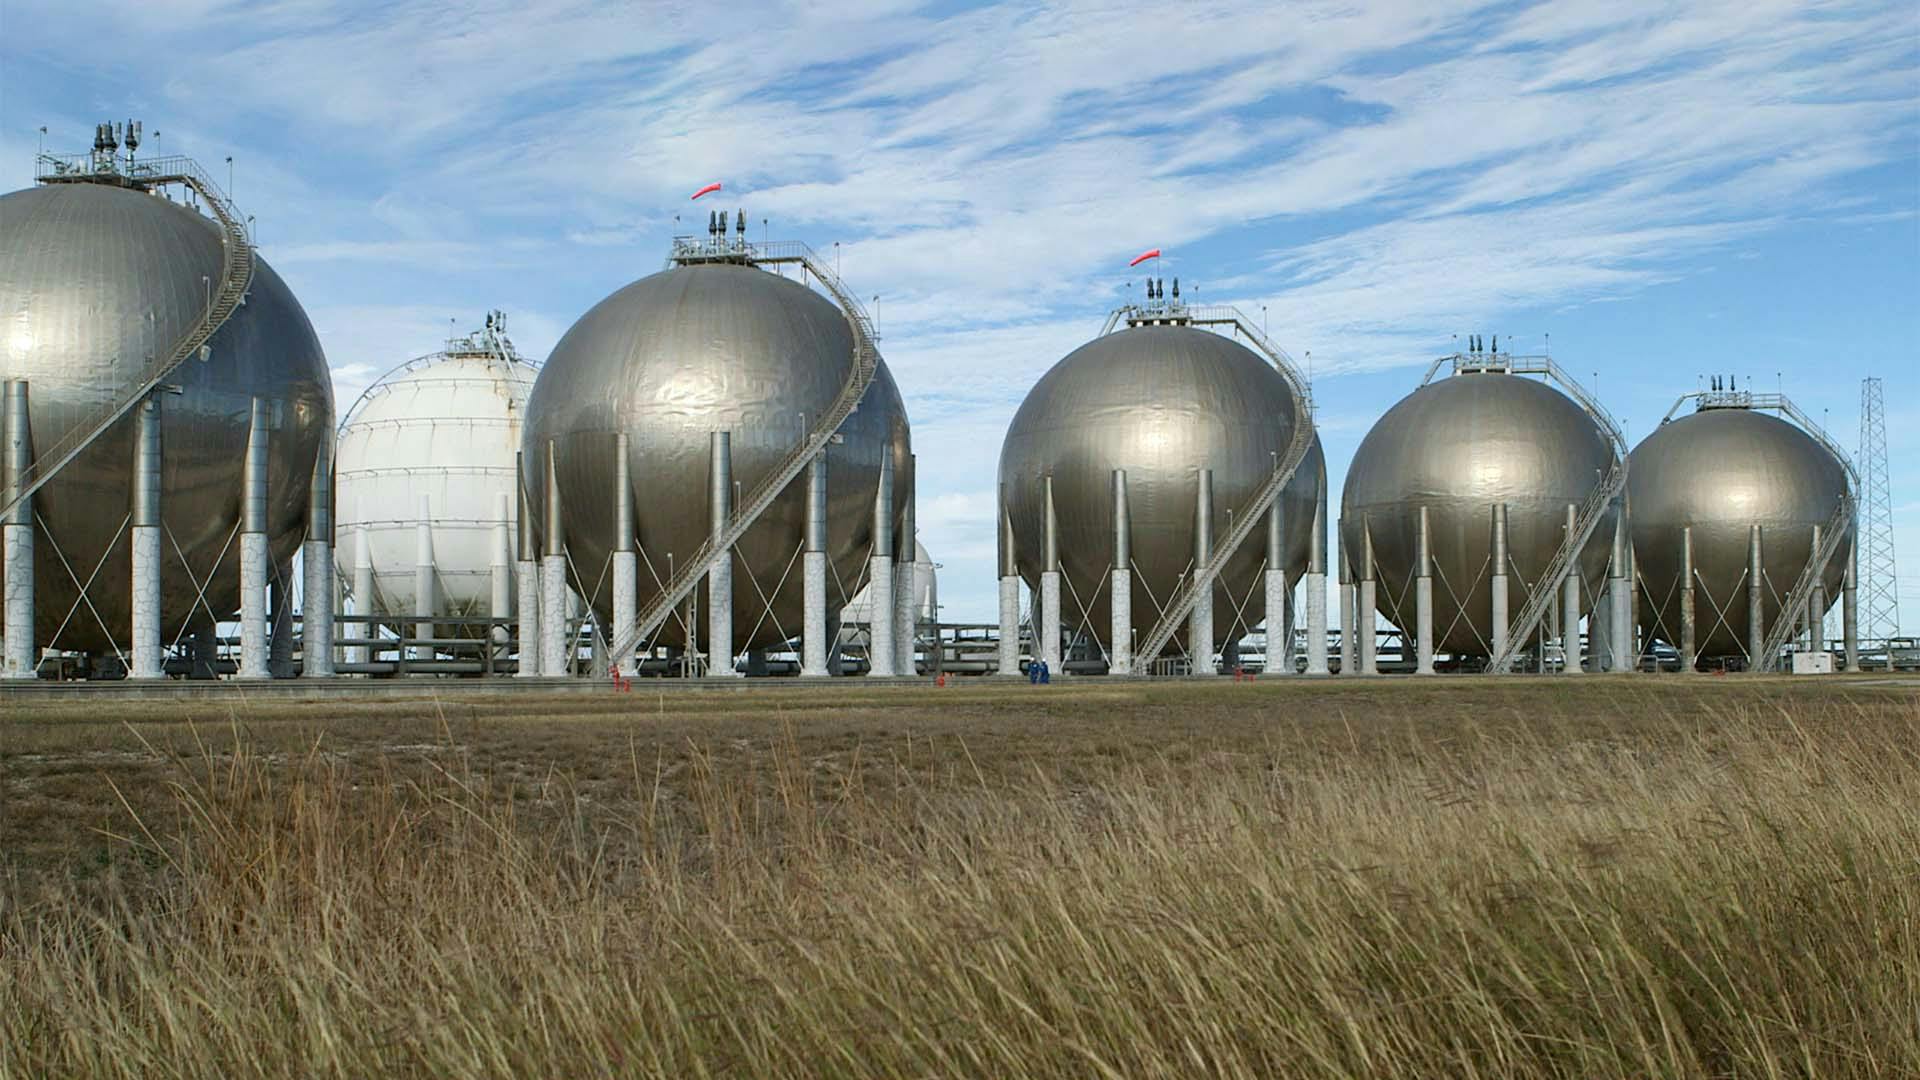 Row of spheres at OxyChem Ingleside Plant